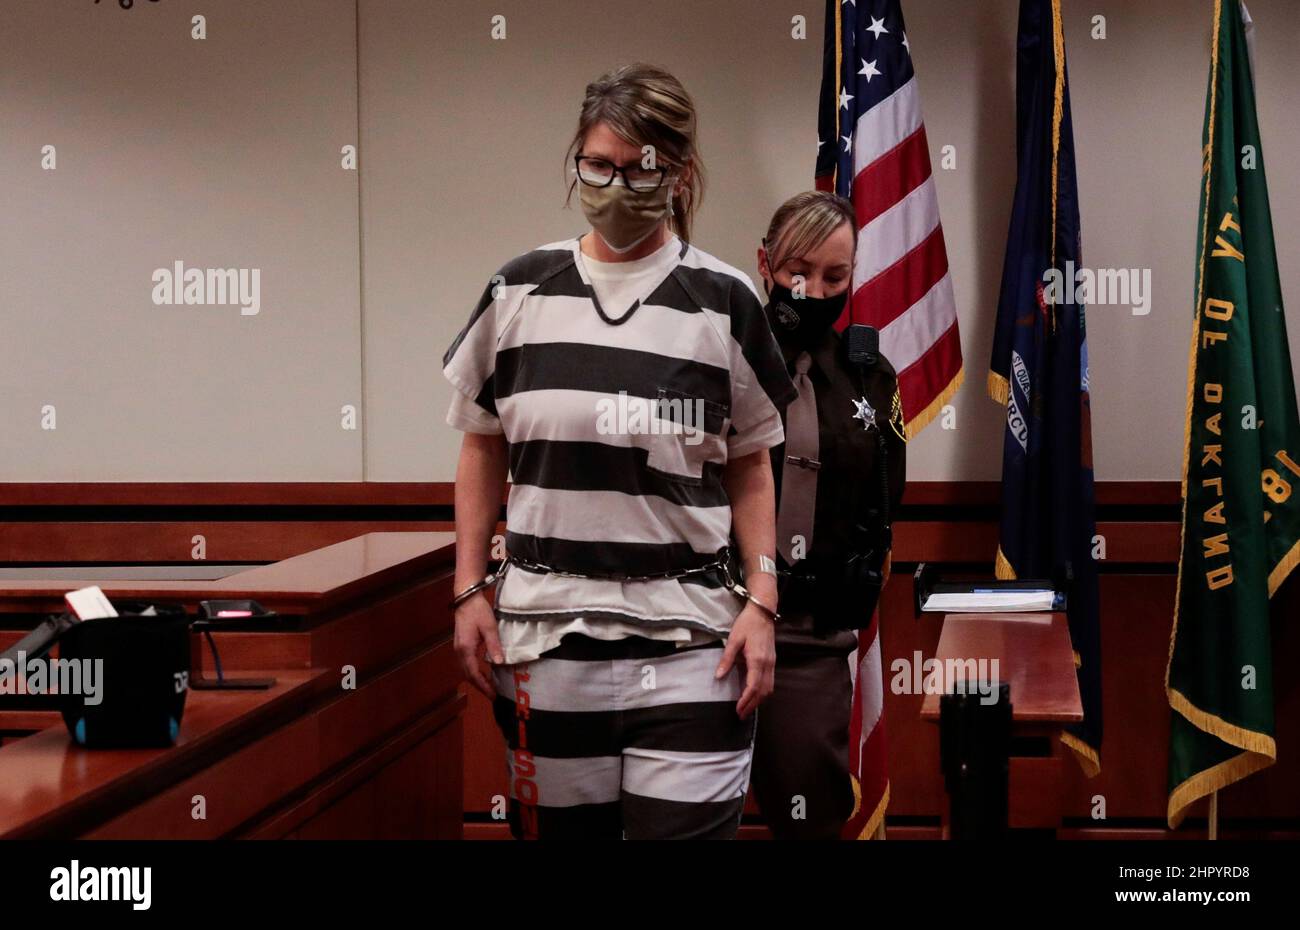 Jennifer Crumbley, the mother of accused Oxford High School gunman Ethan Crumbley, enters the court room during a court procedural hearing in Rochester Hills, Michigan, U.S., February 24, 2022. Stock Photo